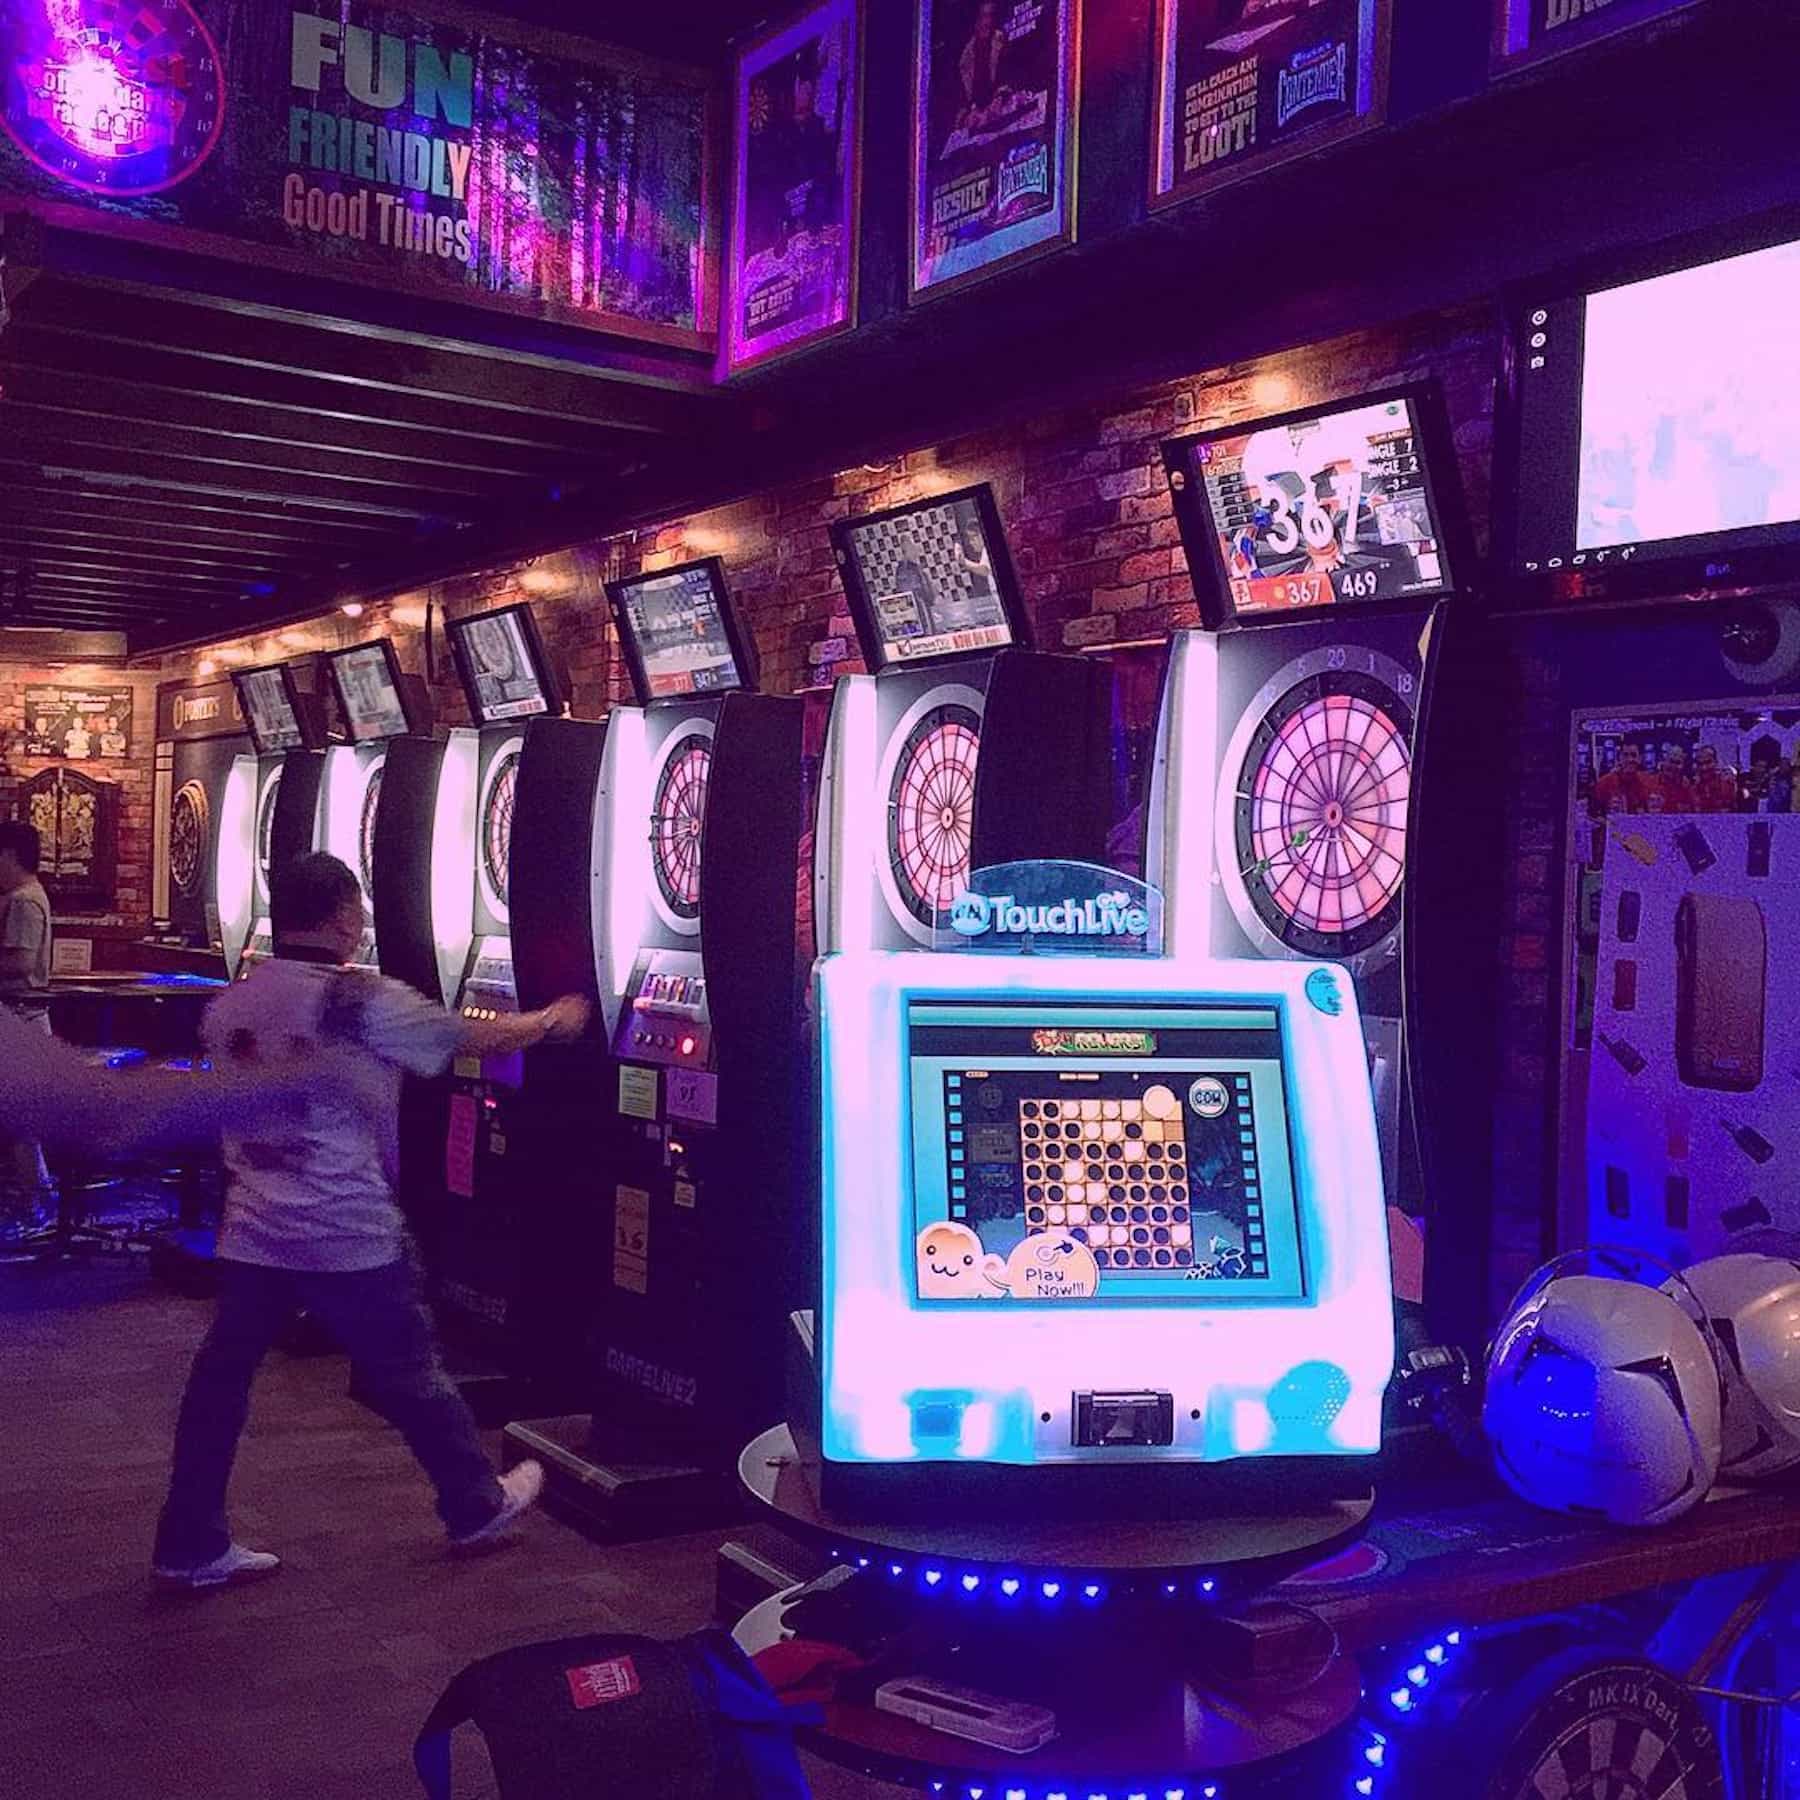 Fun Bars With Arcade Games And Drinking Challenges 15